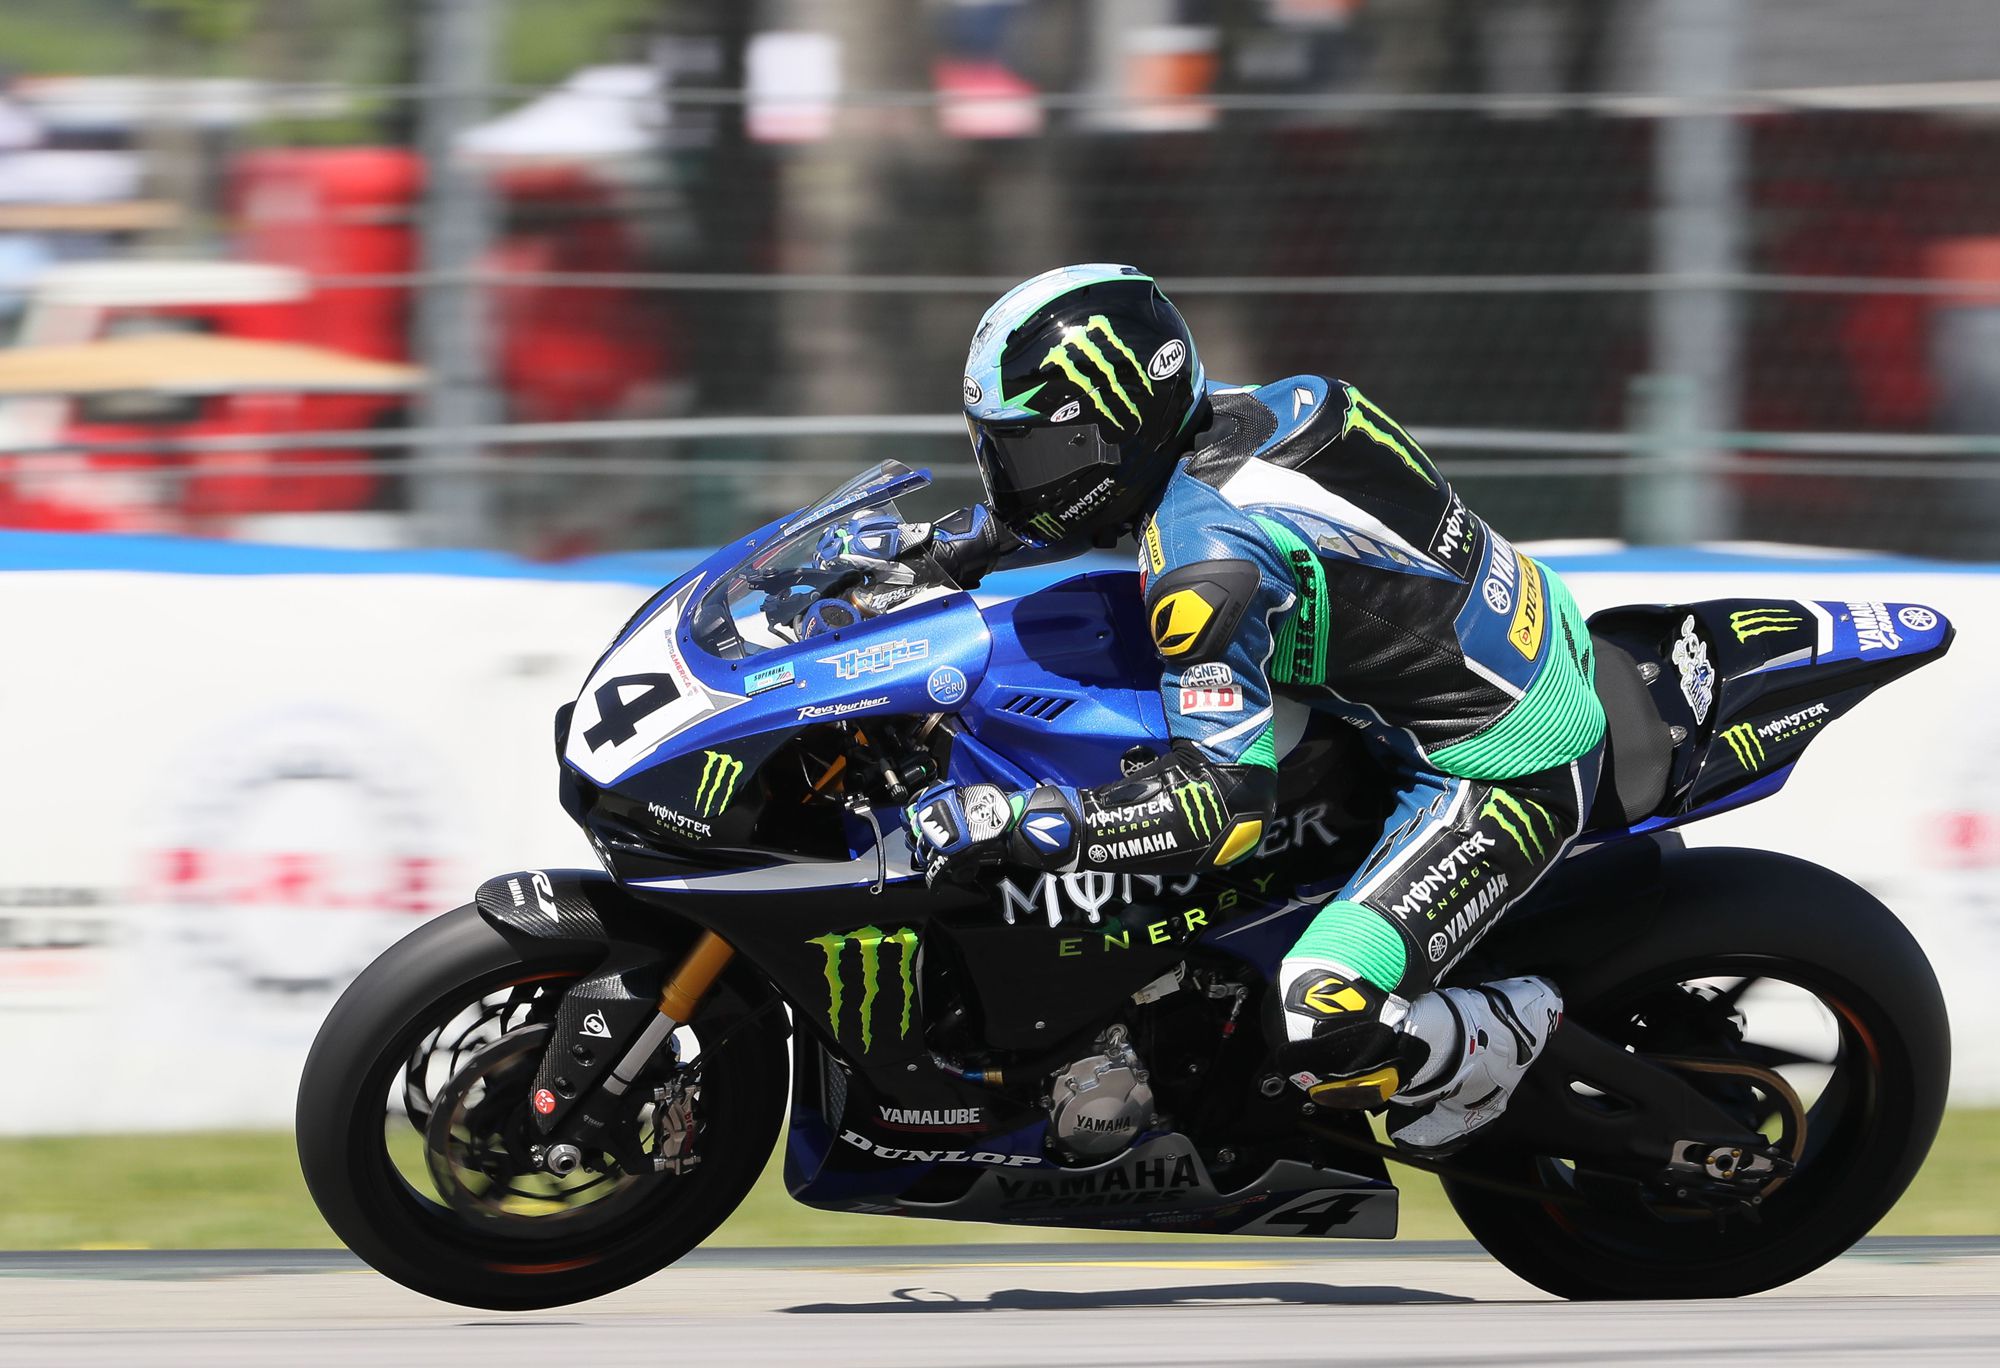 Hayes Tops Hayden in another Close AMA Pro SuperBike Shootout in Birmingham